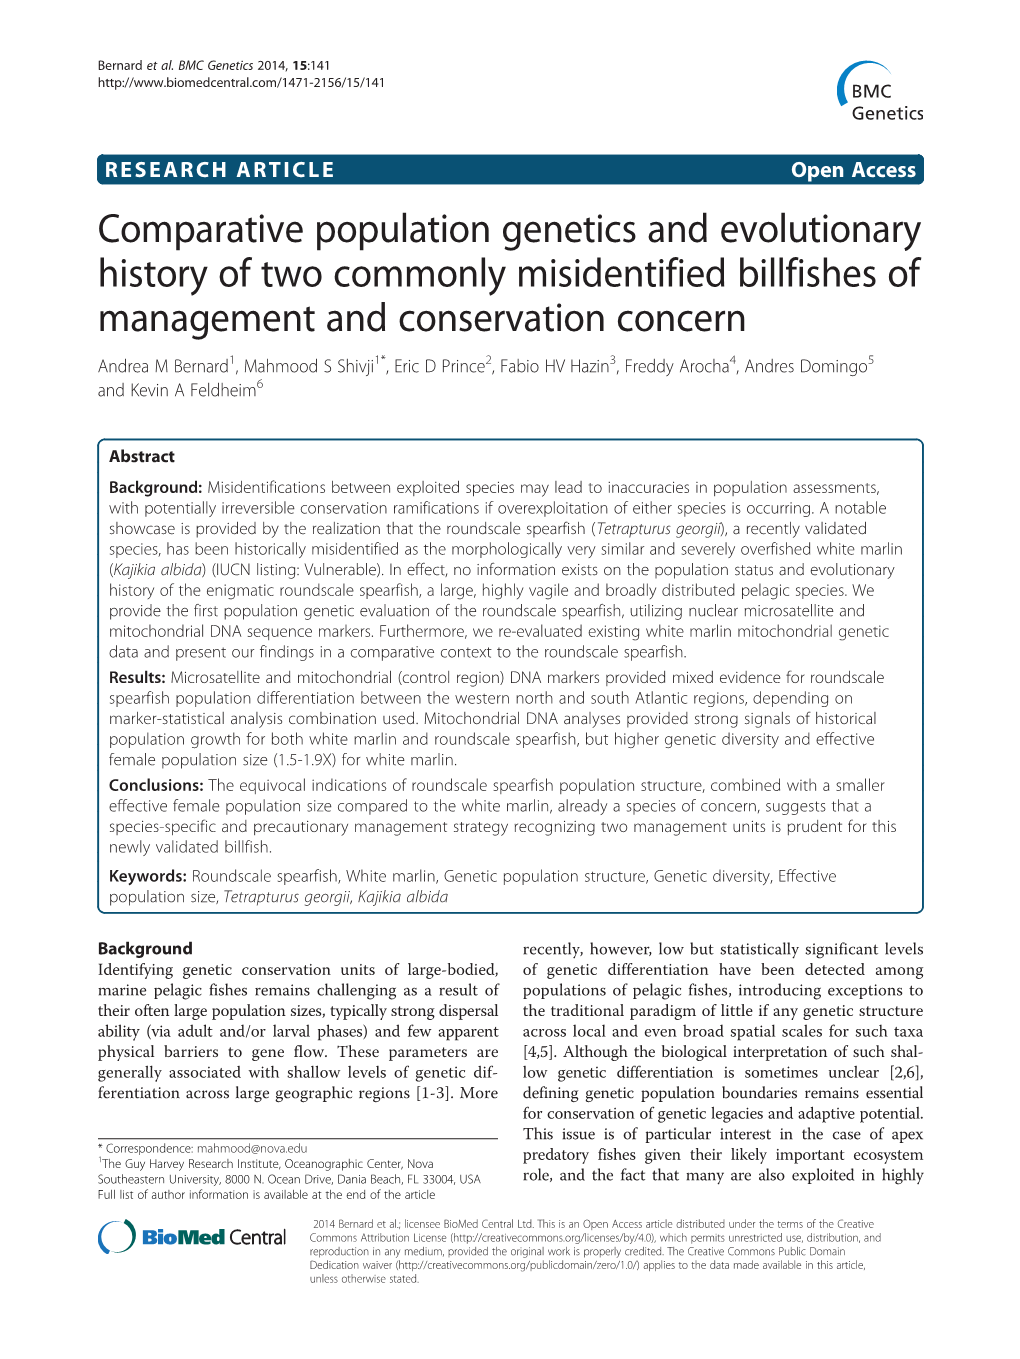 Comparative Population Genetics and Evolutionary History of Two